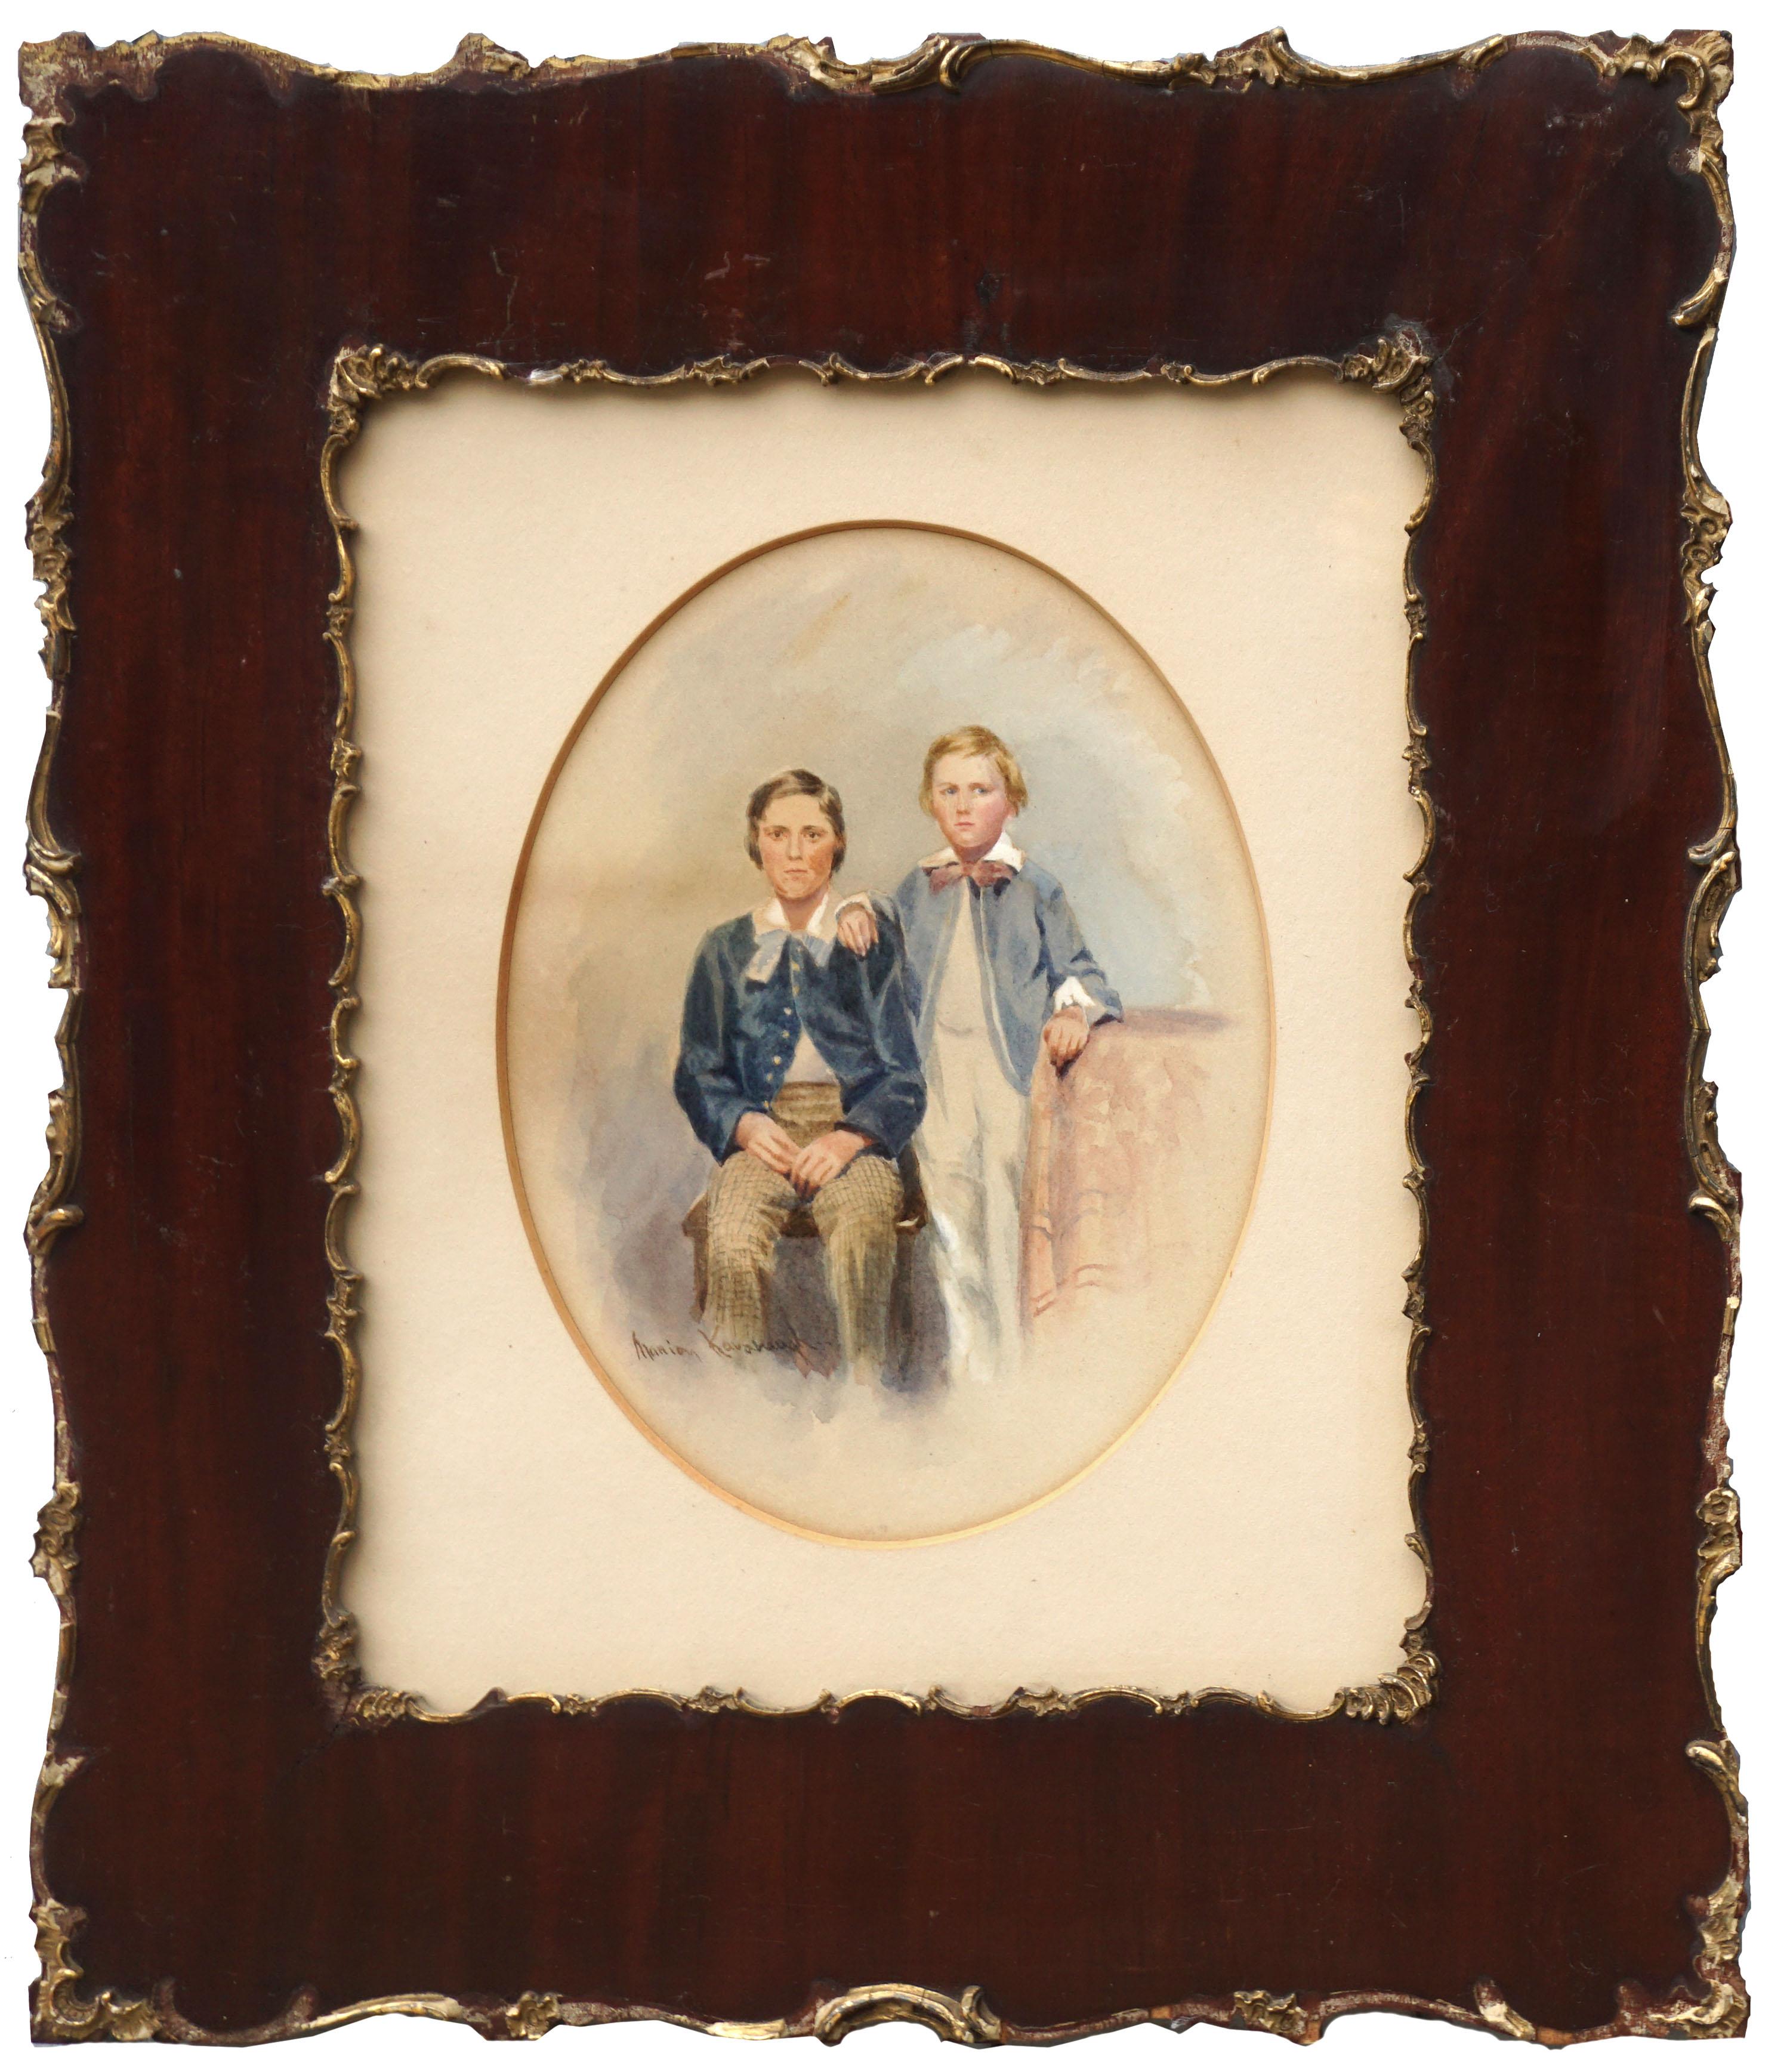 Turn of the 20th Century Portrait of Two Brothers - Art by Marion Kavanaugh Wachtel